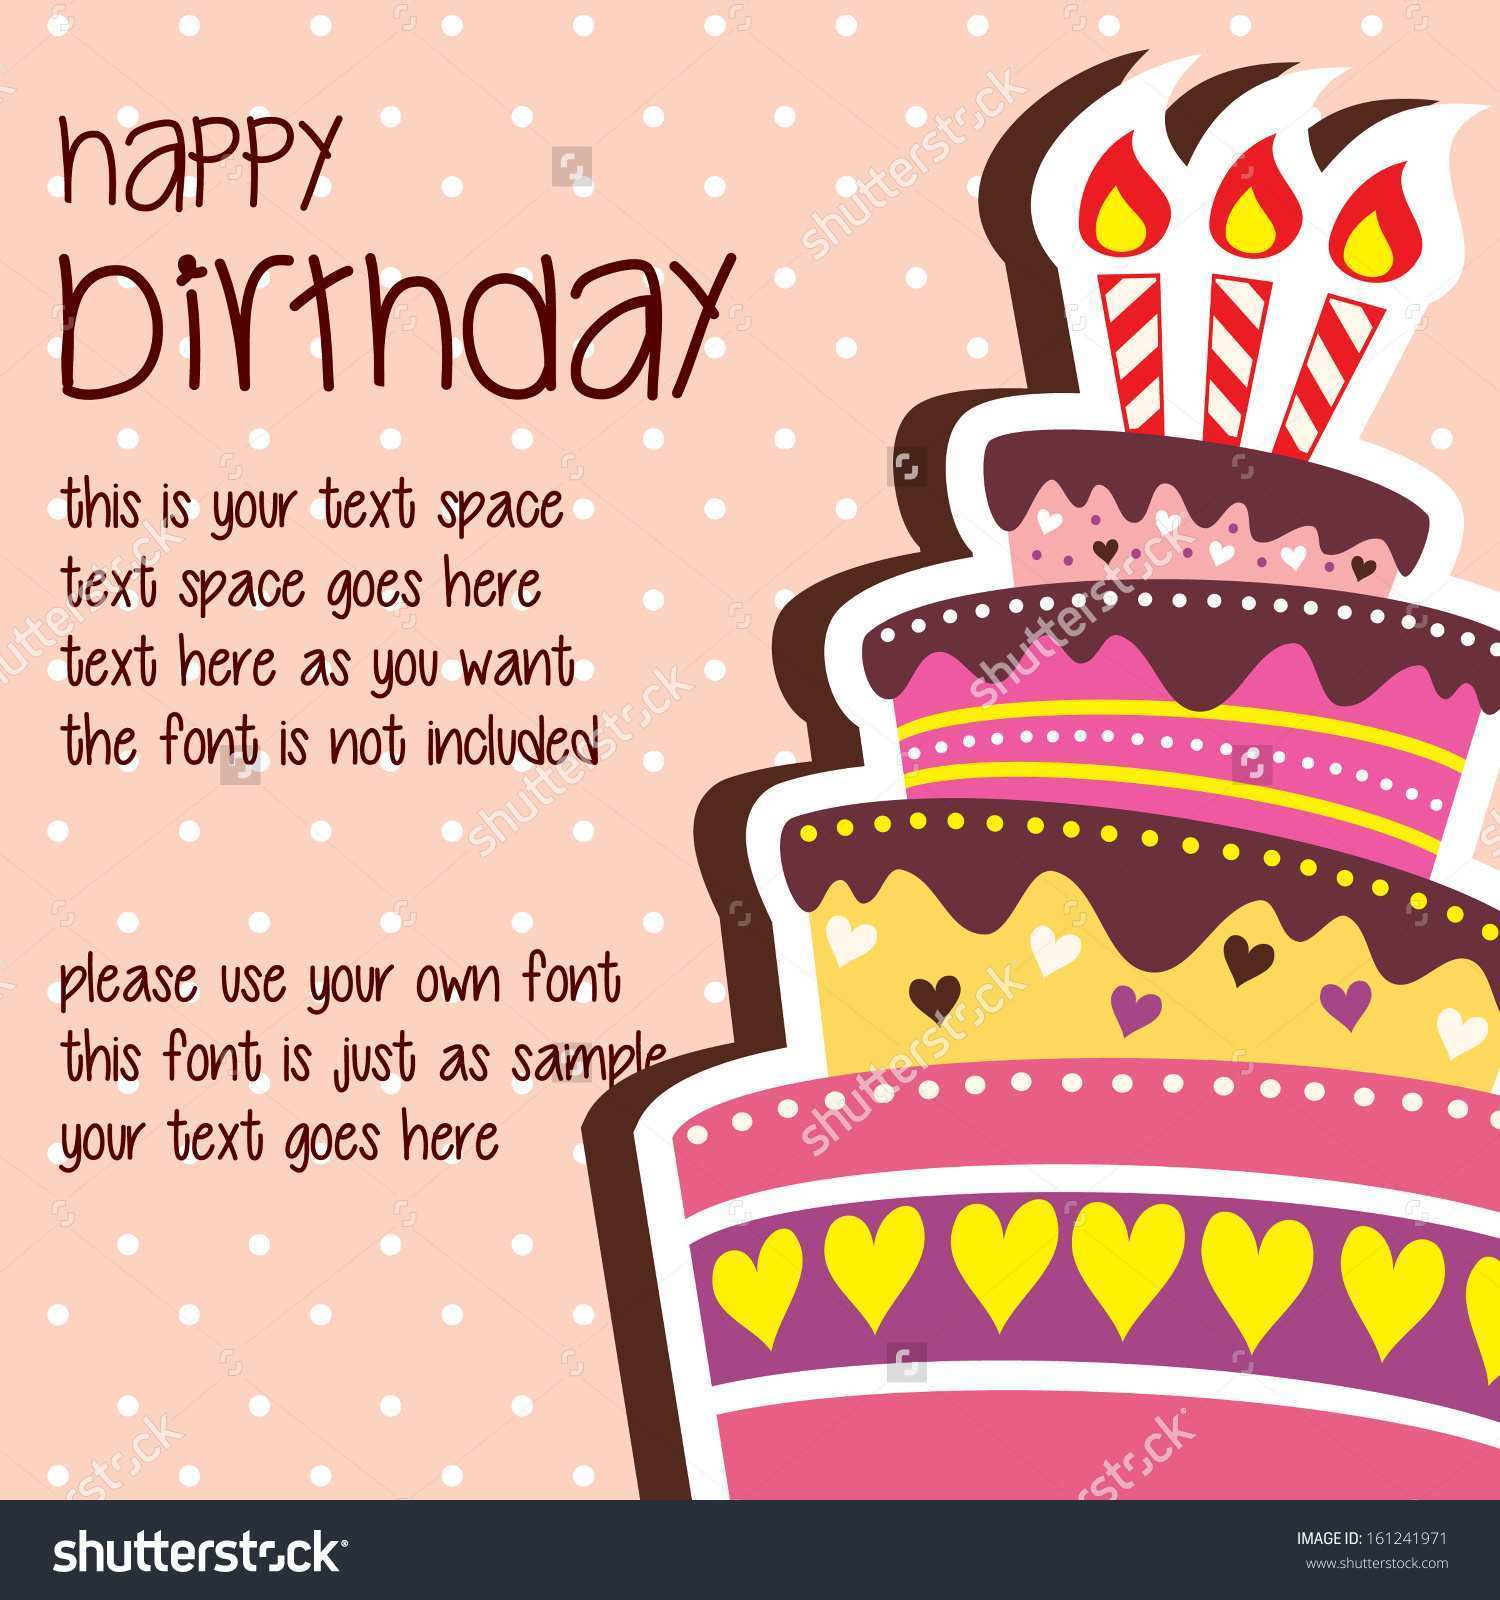 61 Customize Our Free Birthday Card Templates In Word Now with Birthday Card Templates In Word